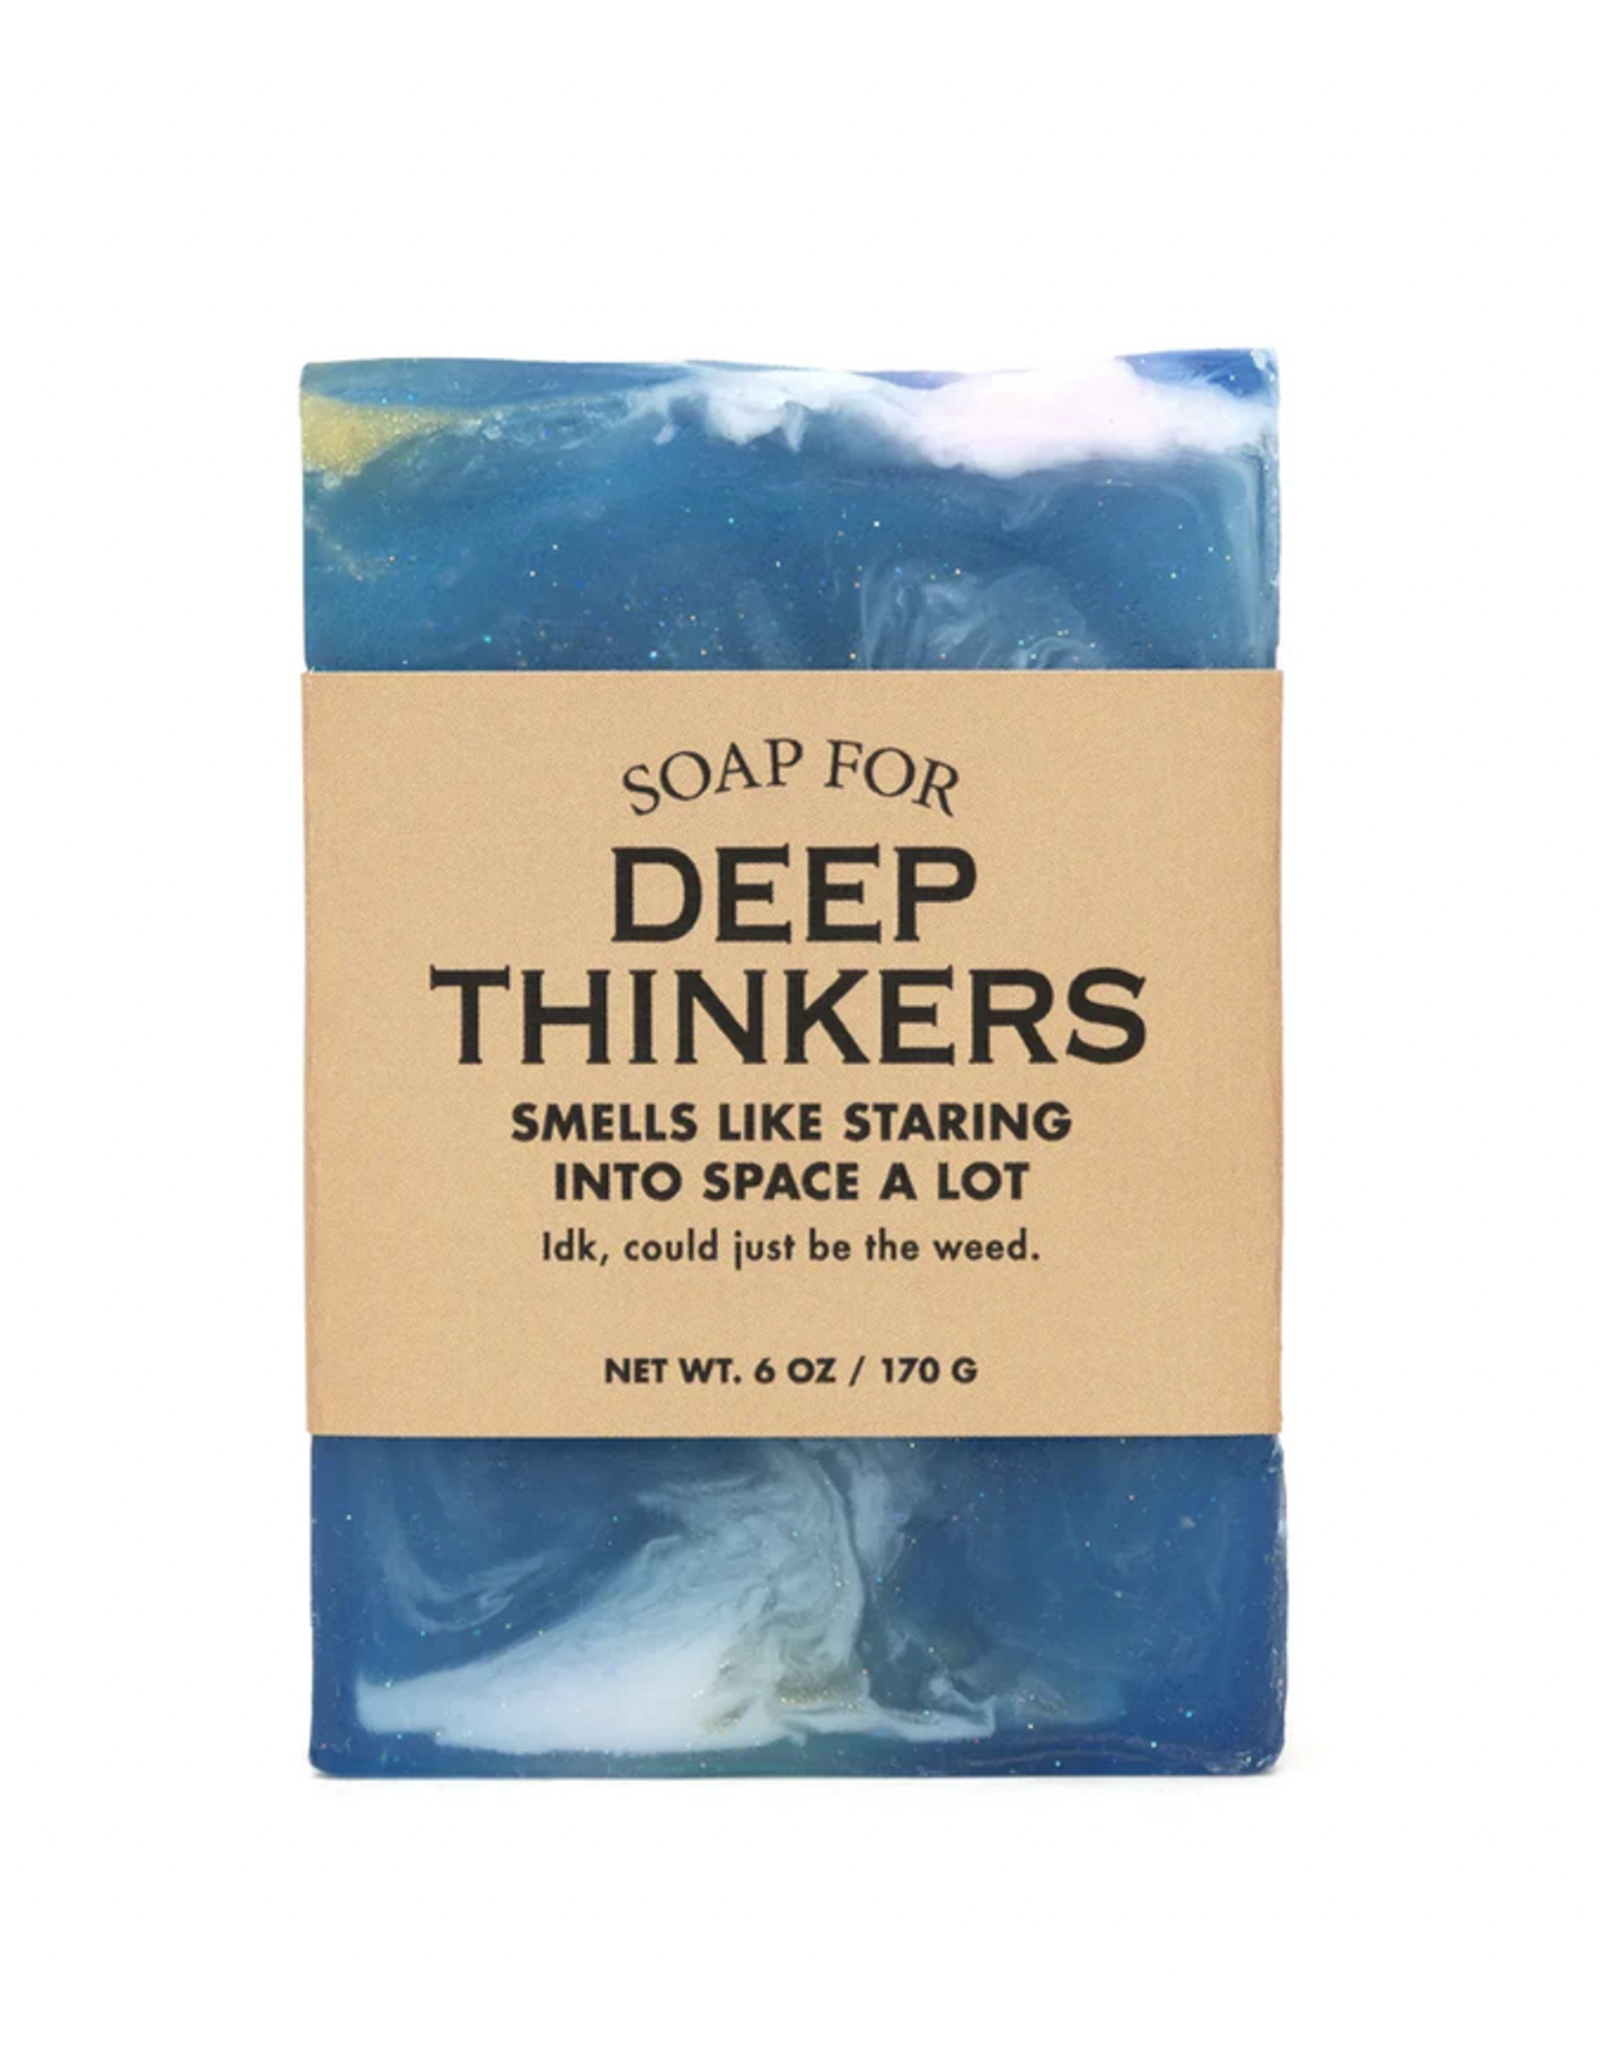 A Soap for The Deep Thinkers